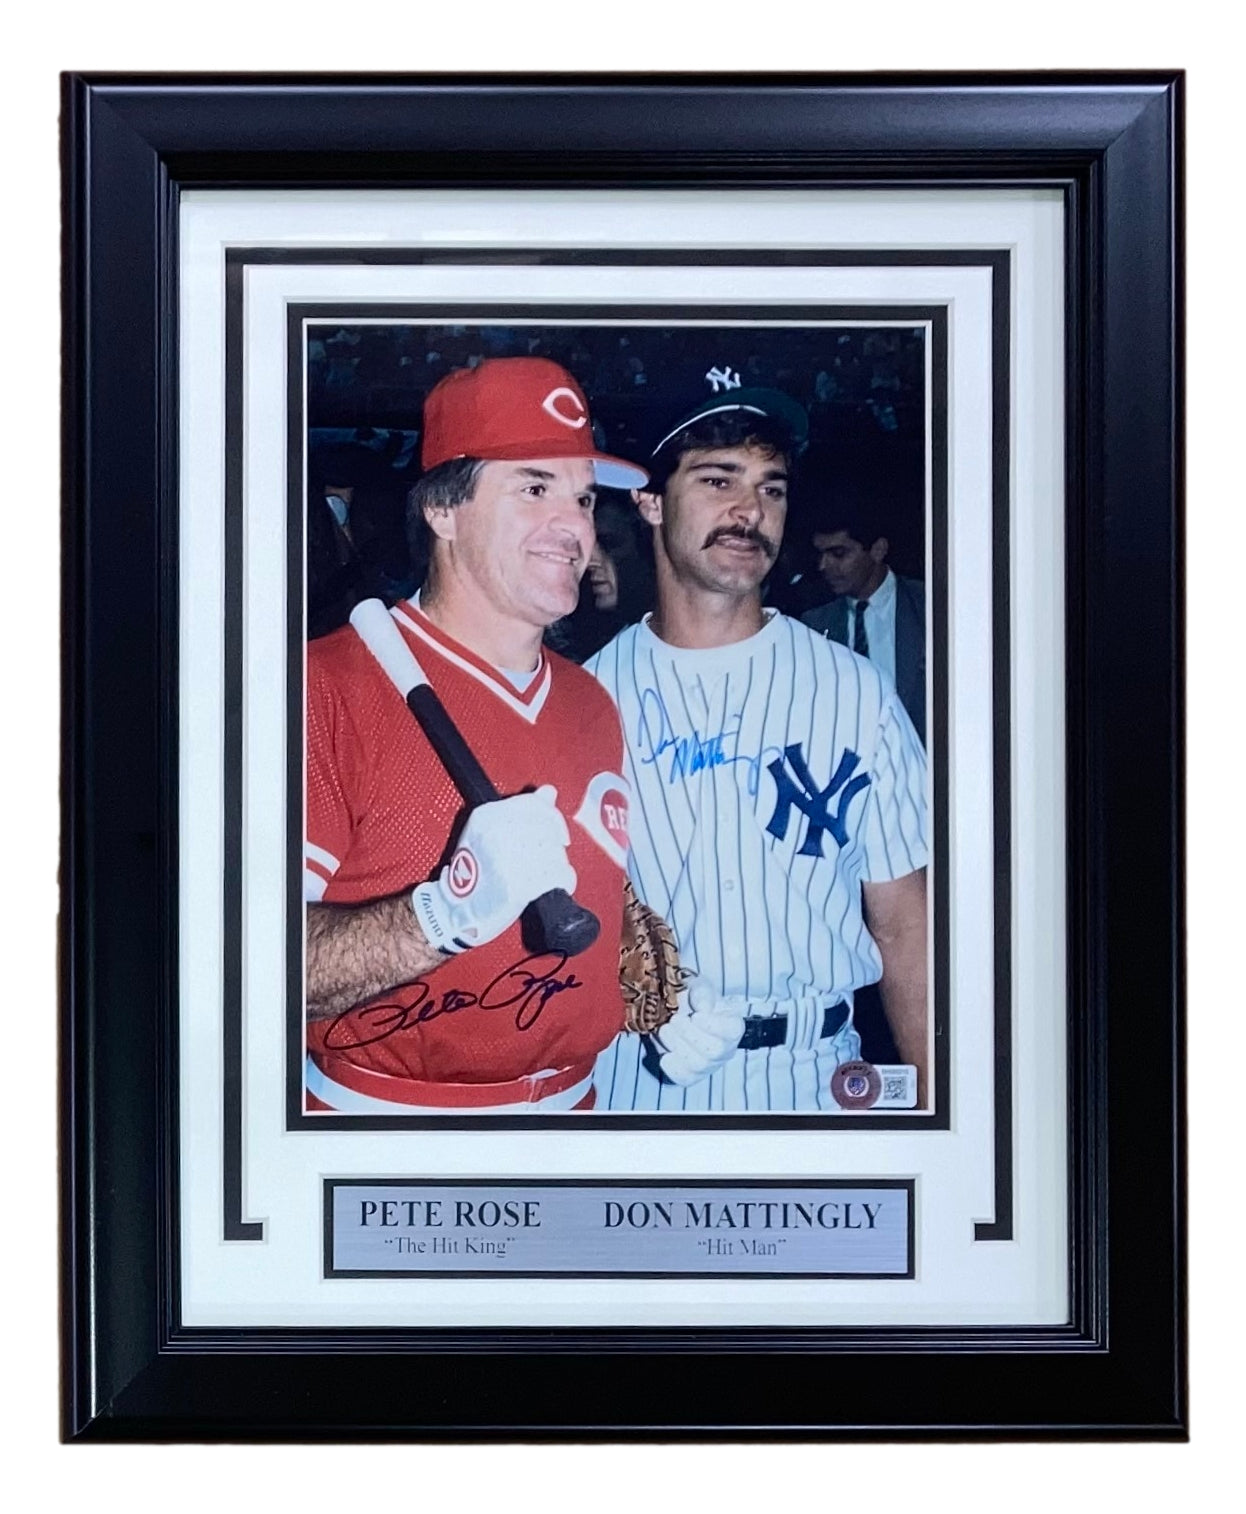 Don Mattingly Autographed Signed Framed New York Yankees 